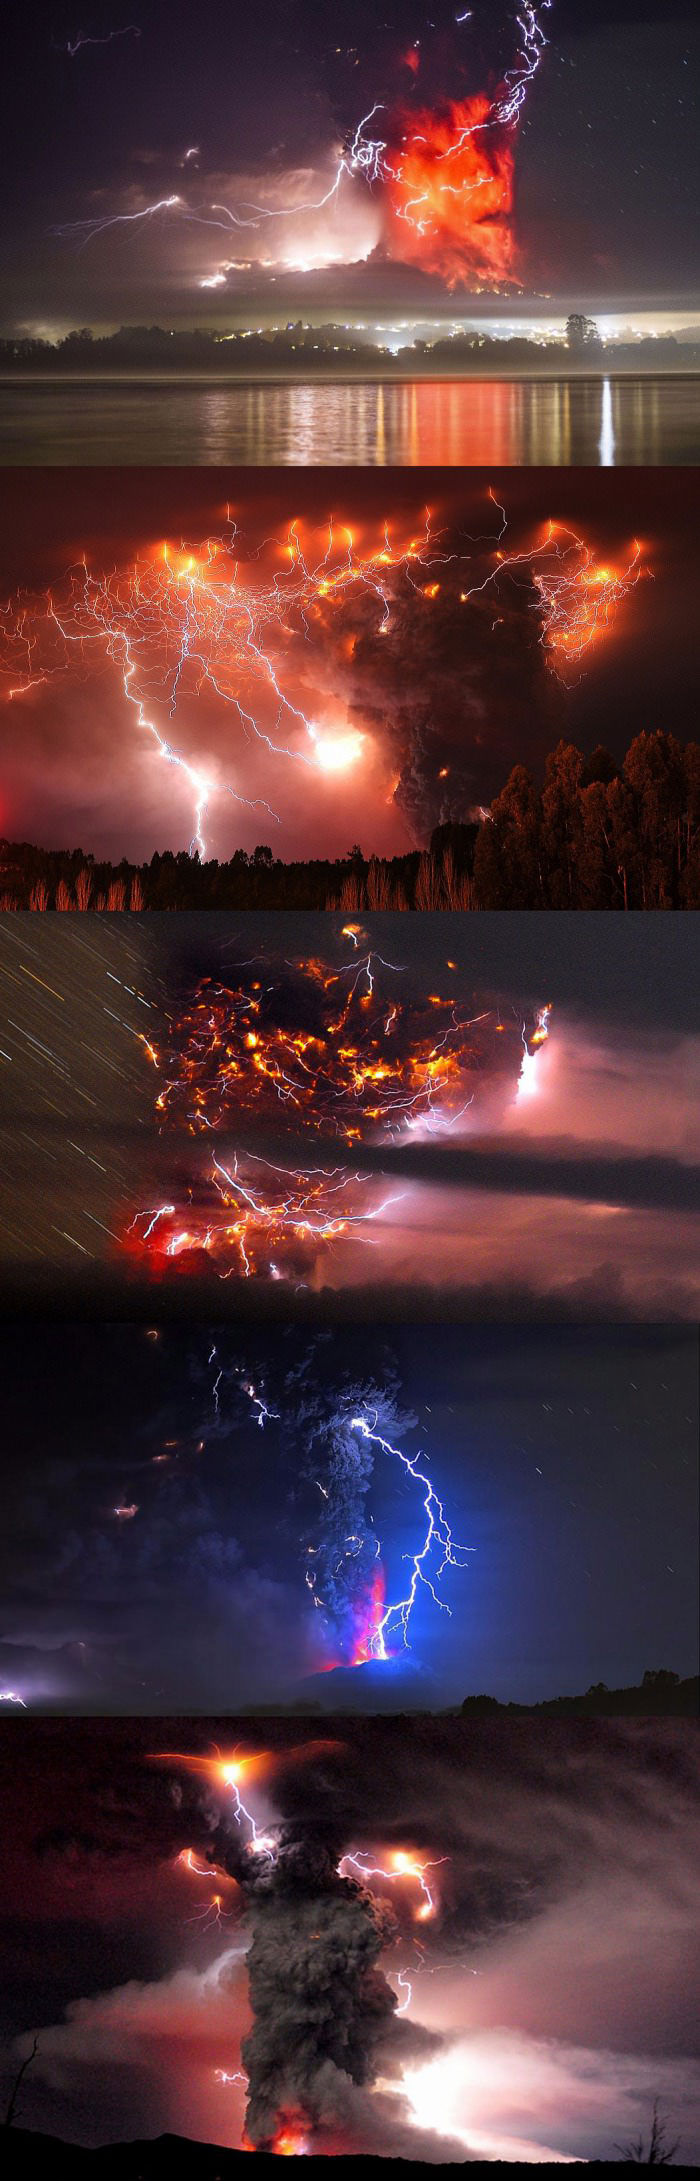 just some photographs from chile's recent volcanic eruptions